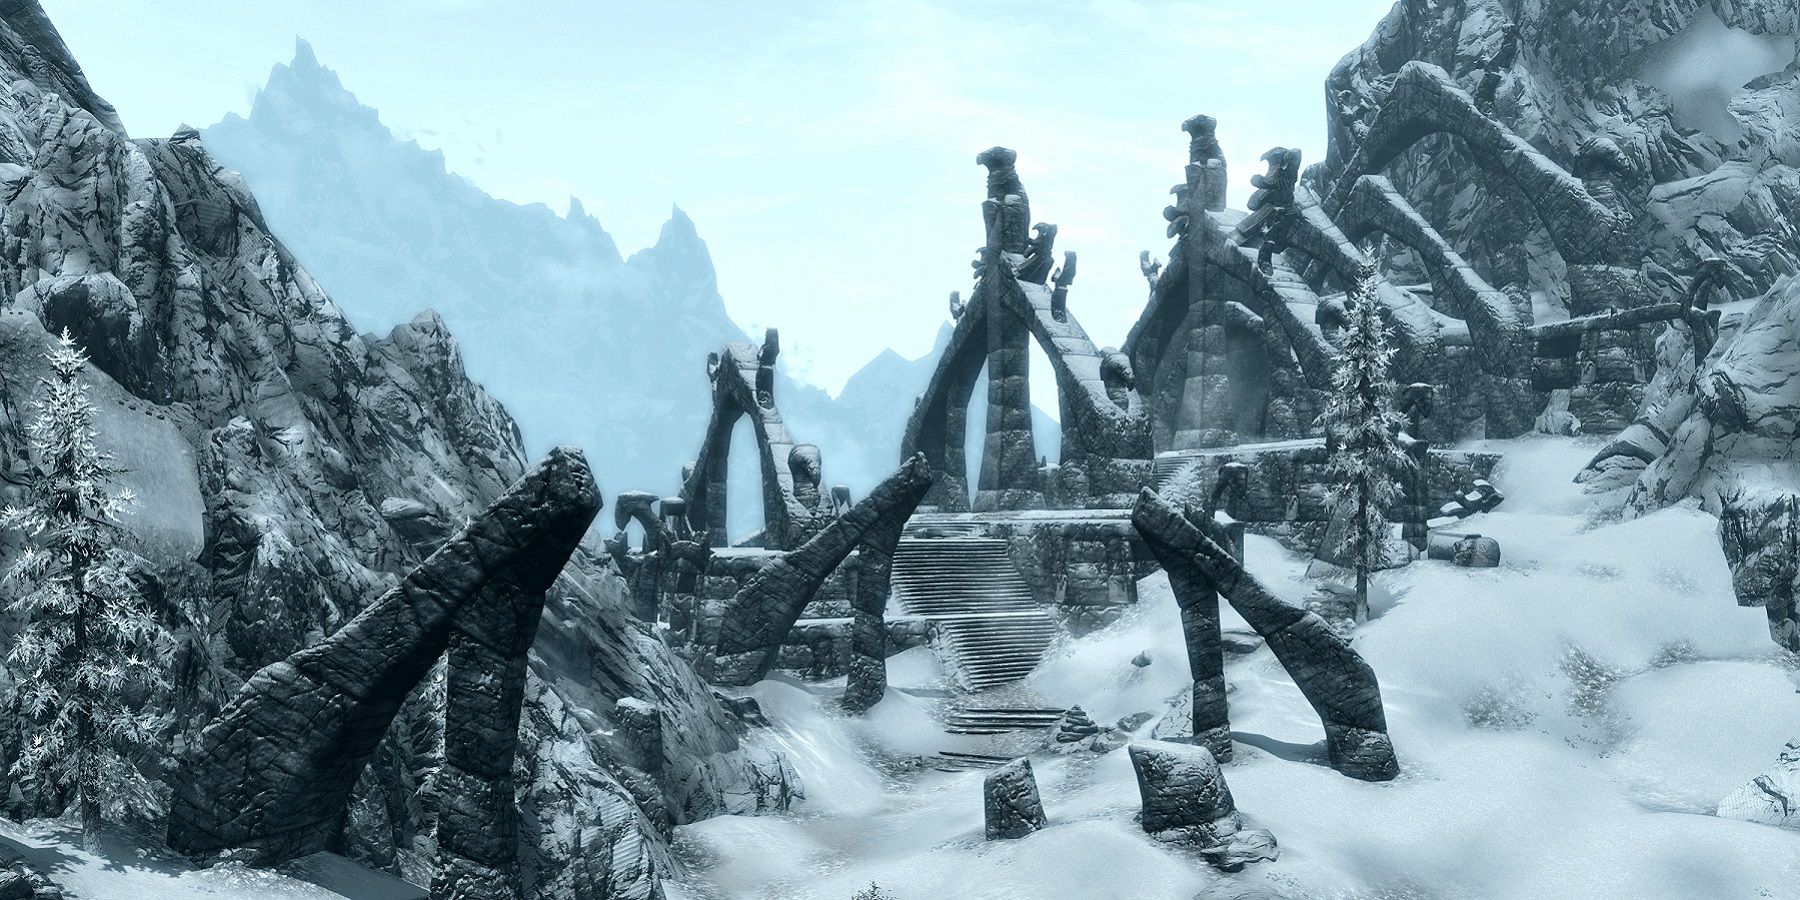 Image from Skyrim showing the snowy entrance to Bleak Falls Barrow.